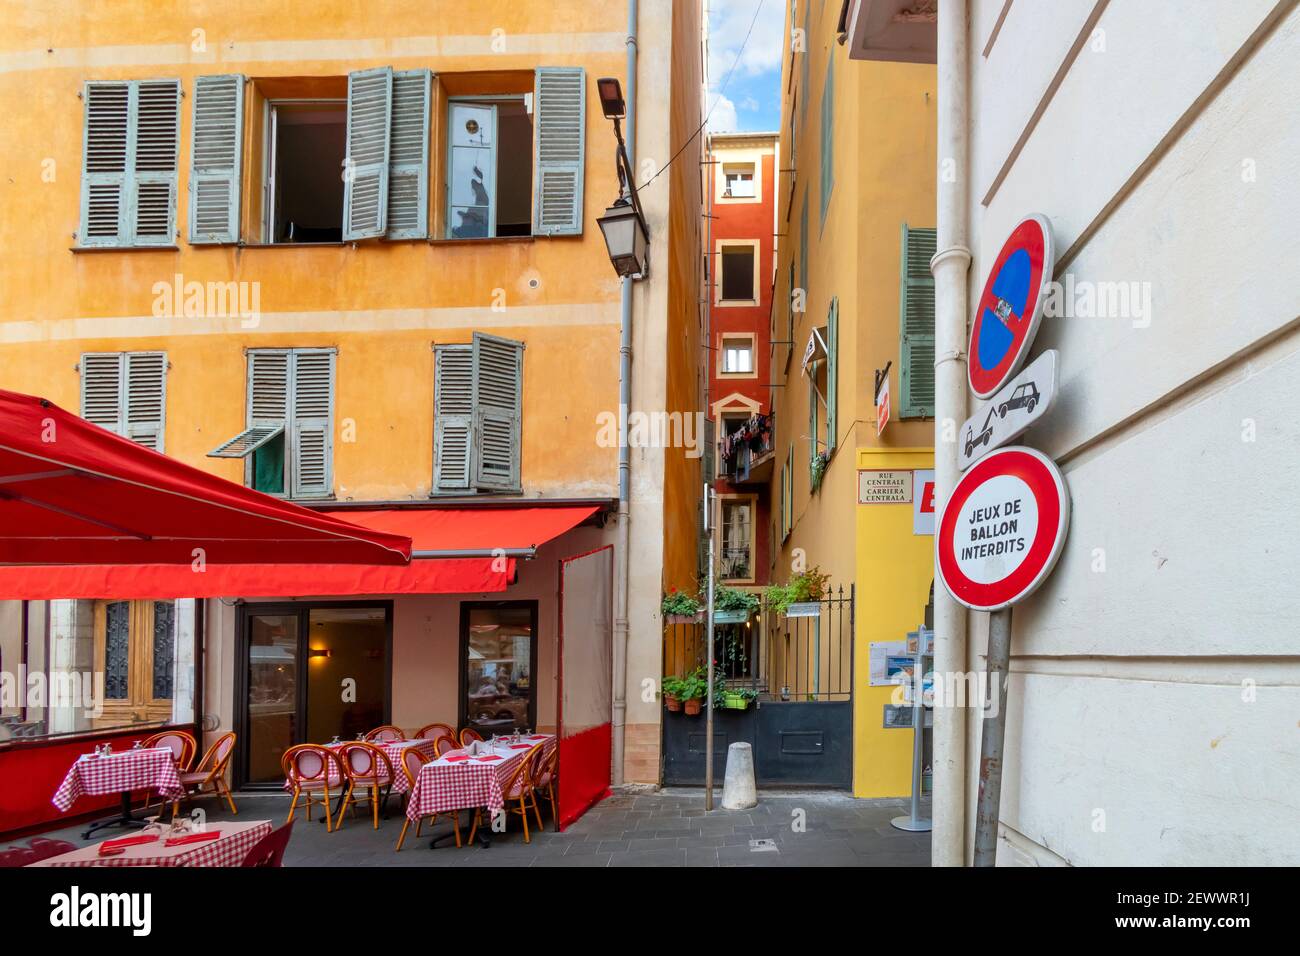 A very narrow gated courtyard at an apartment alongside a sidewalk cafe in the Old Town Vieux Nice section of France, on the French Riviera. Stock Photo